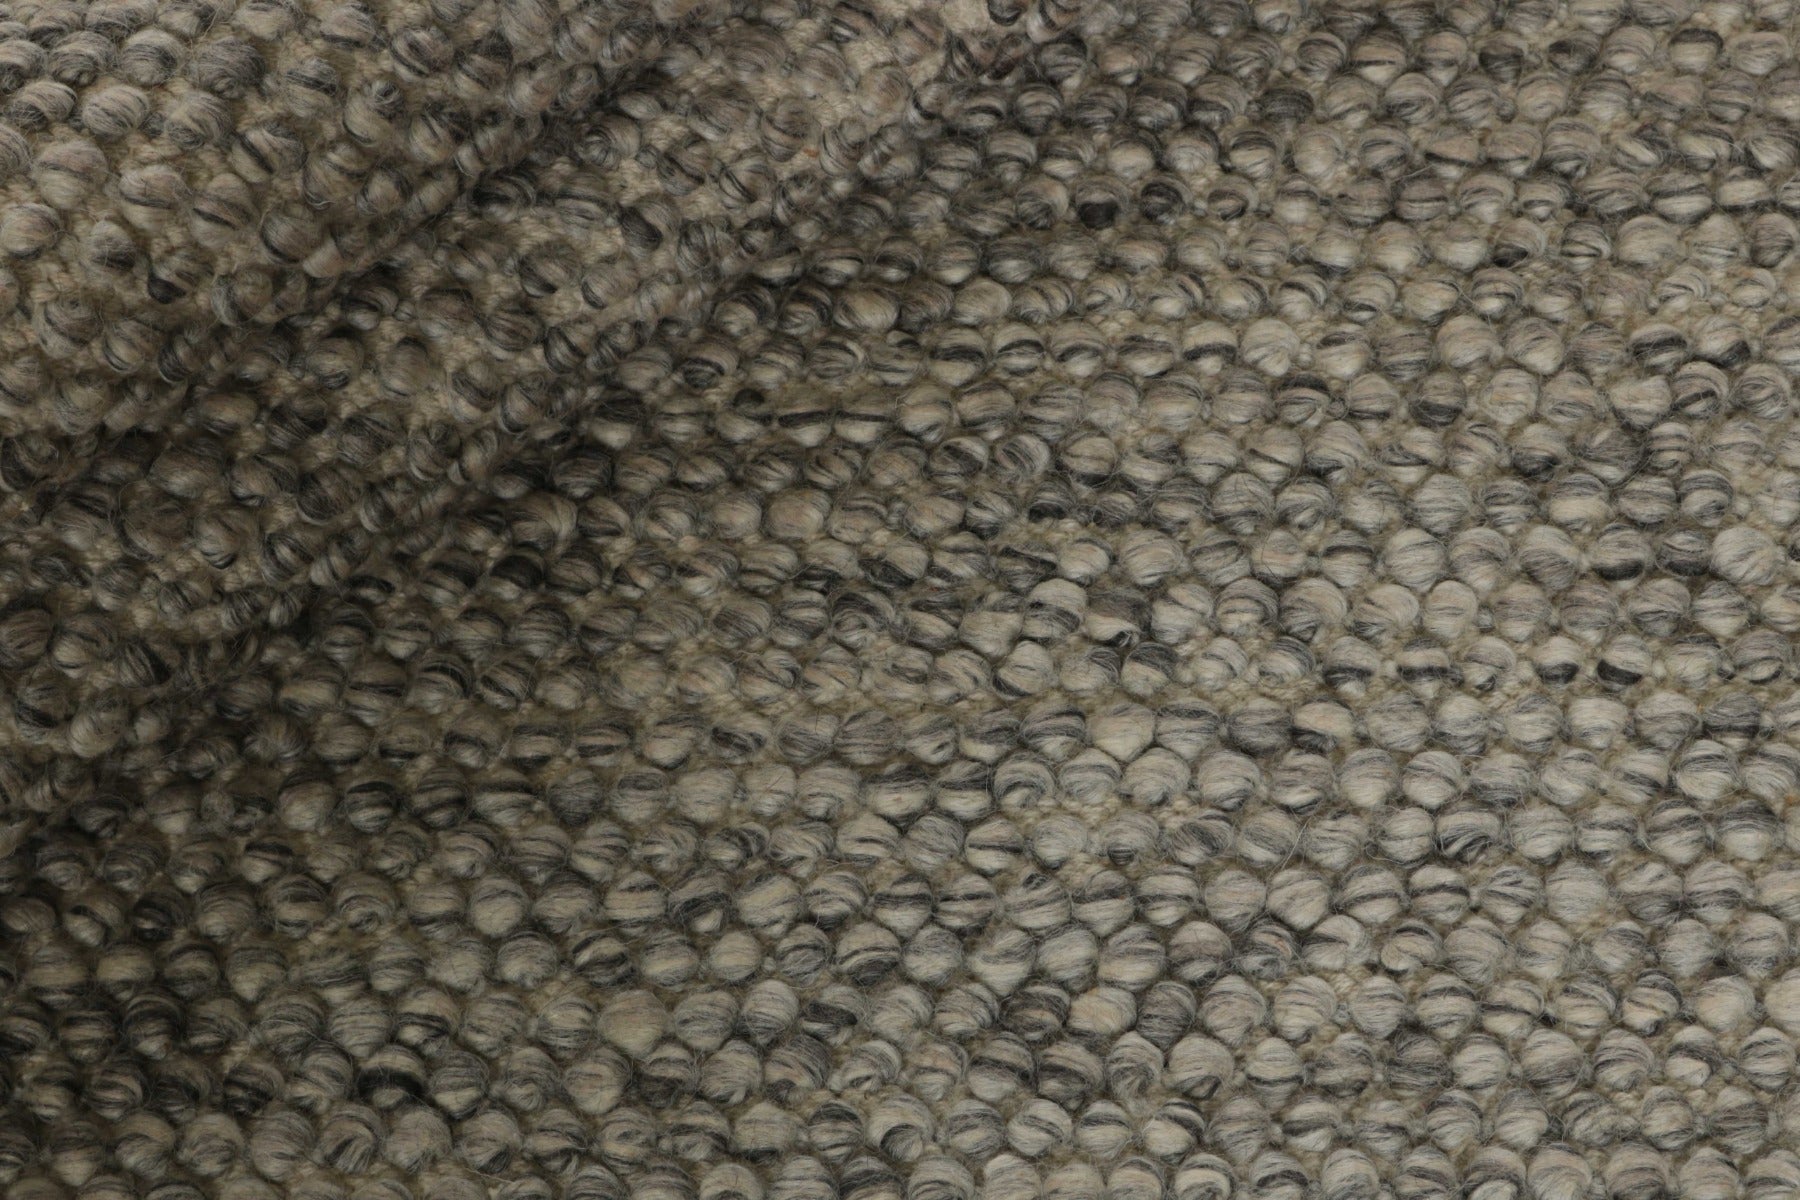 grey and brown textured rug
